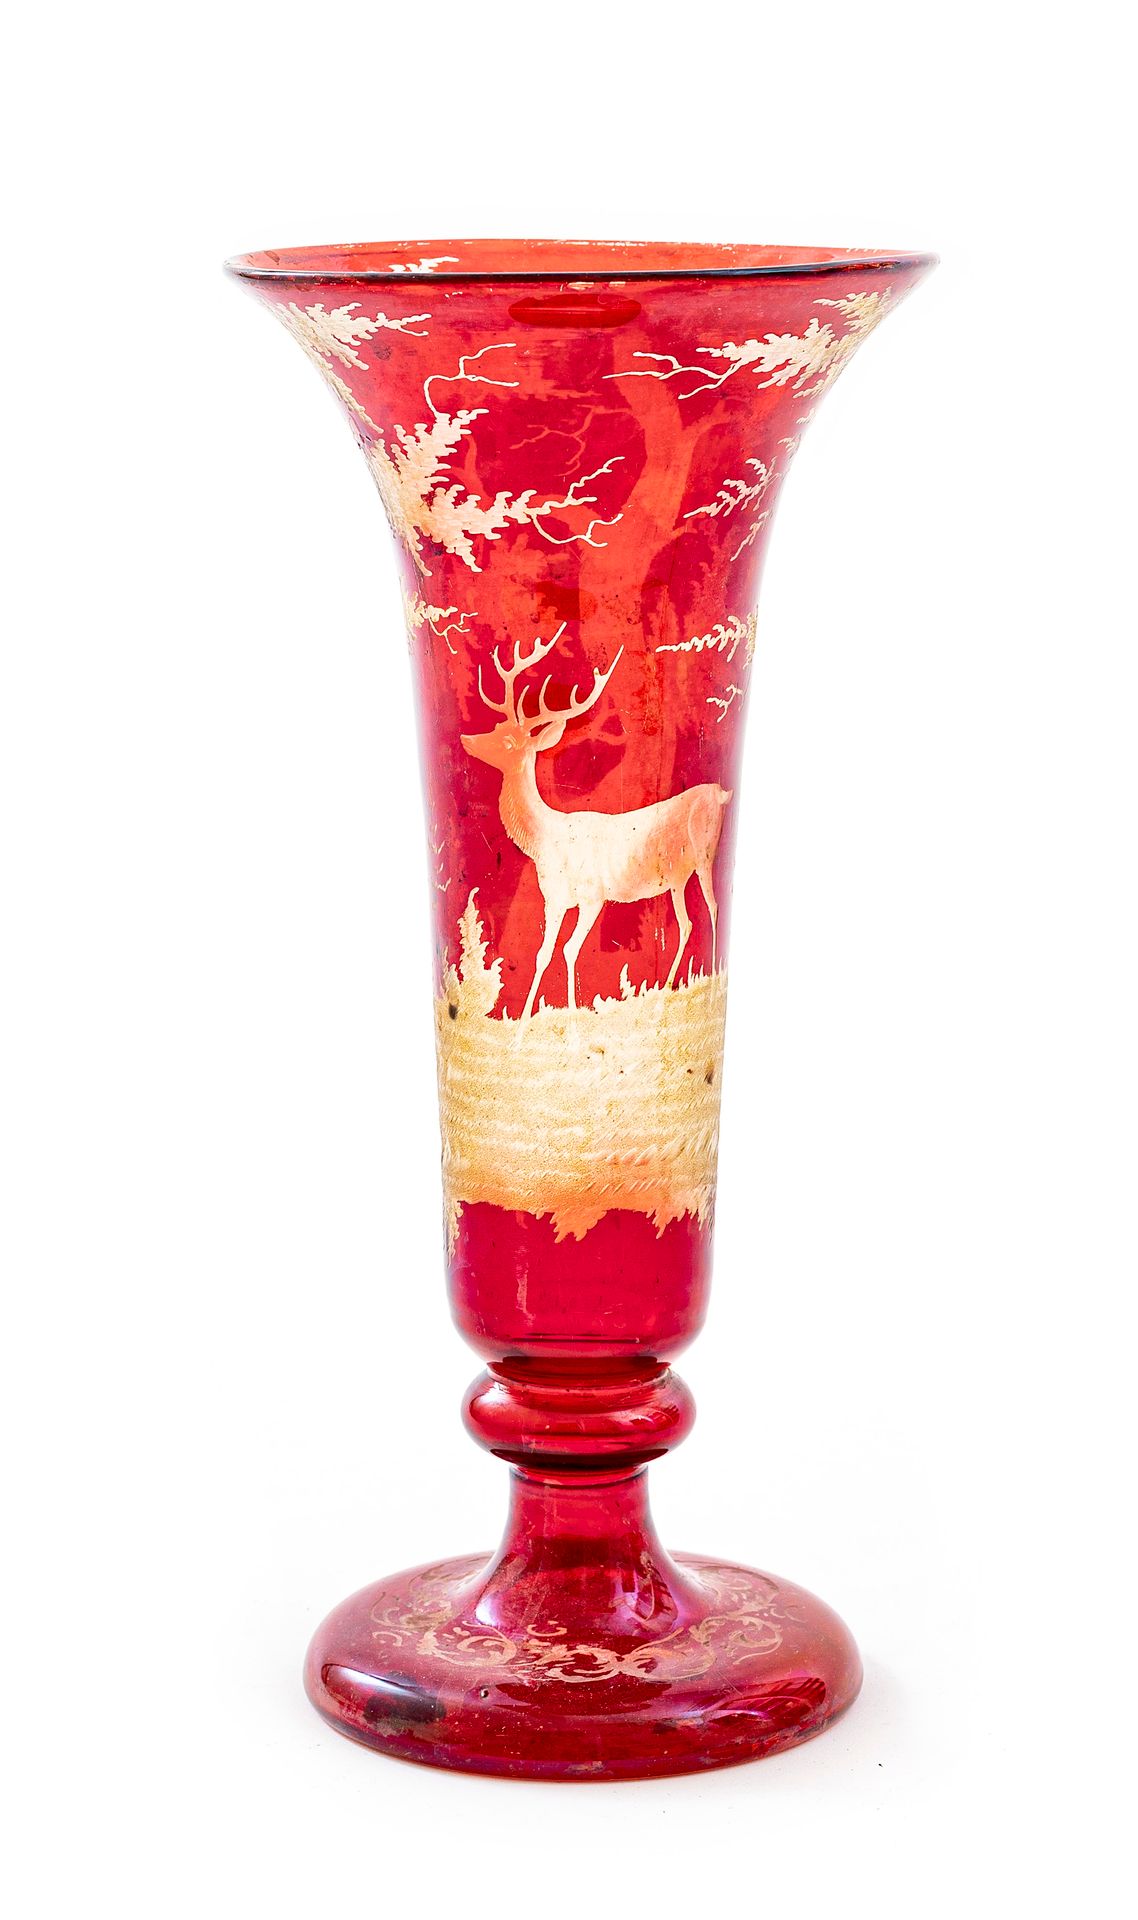 Null Bohemian crystal vase on pedestal with flared neck in red tones

The decora&hellip;